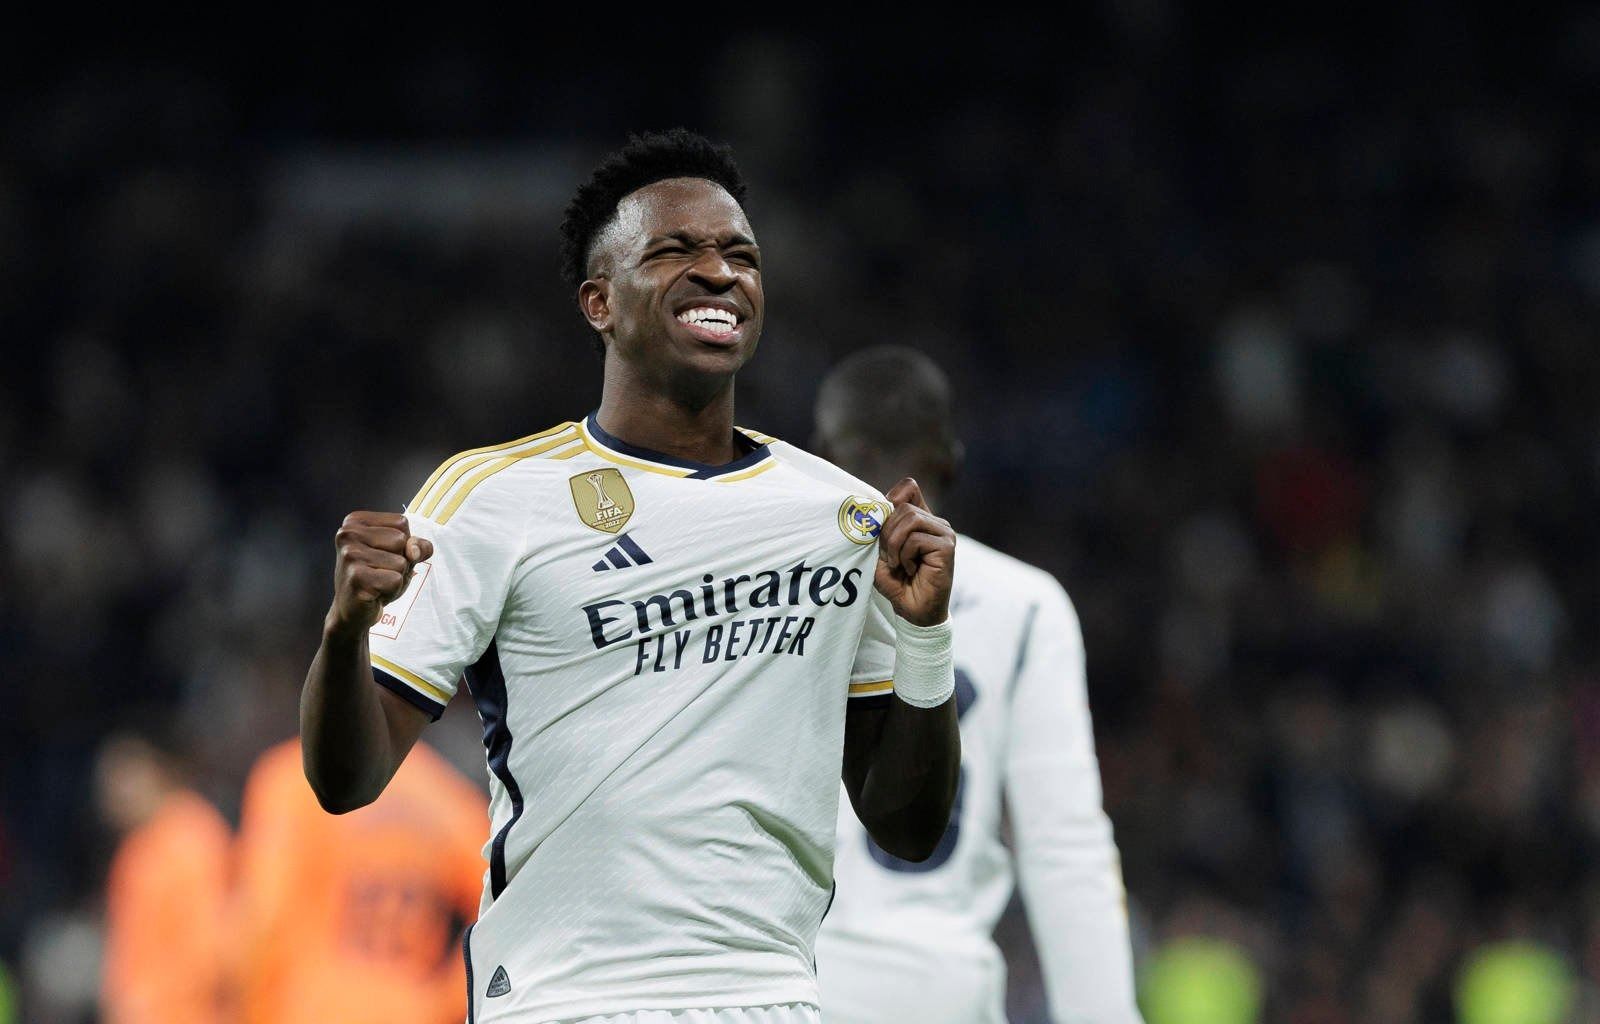 Real Madrid Plan To Raise Vinicius' Salary To Mbappe's Level